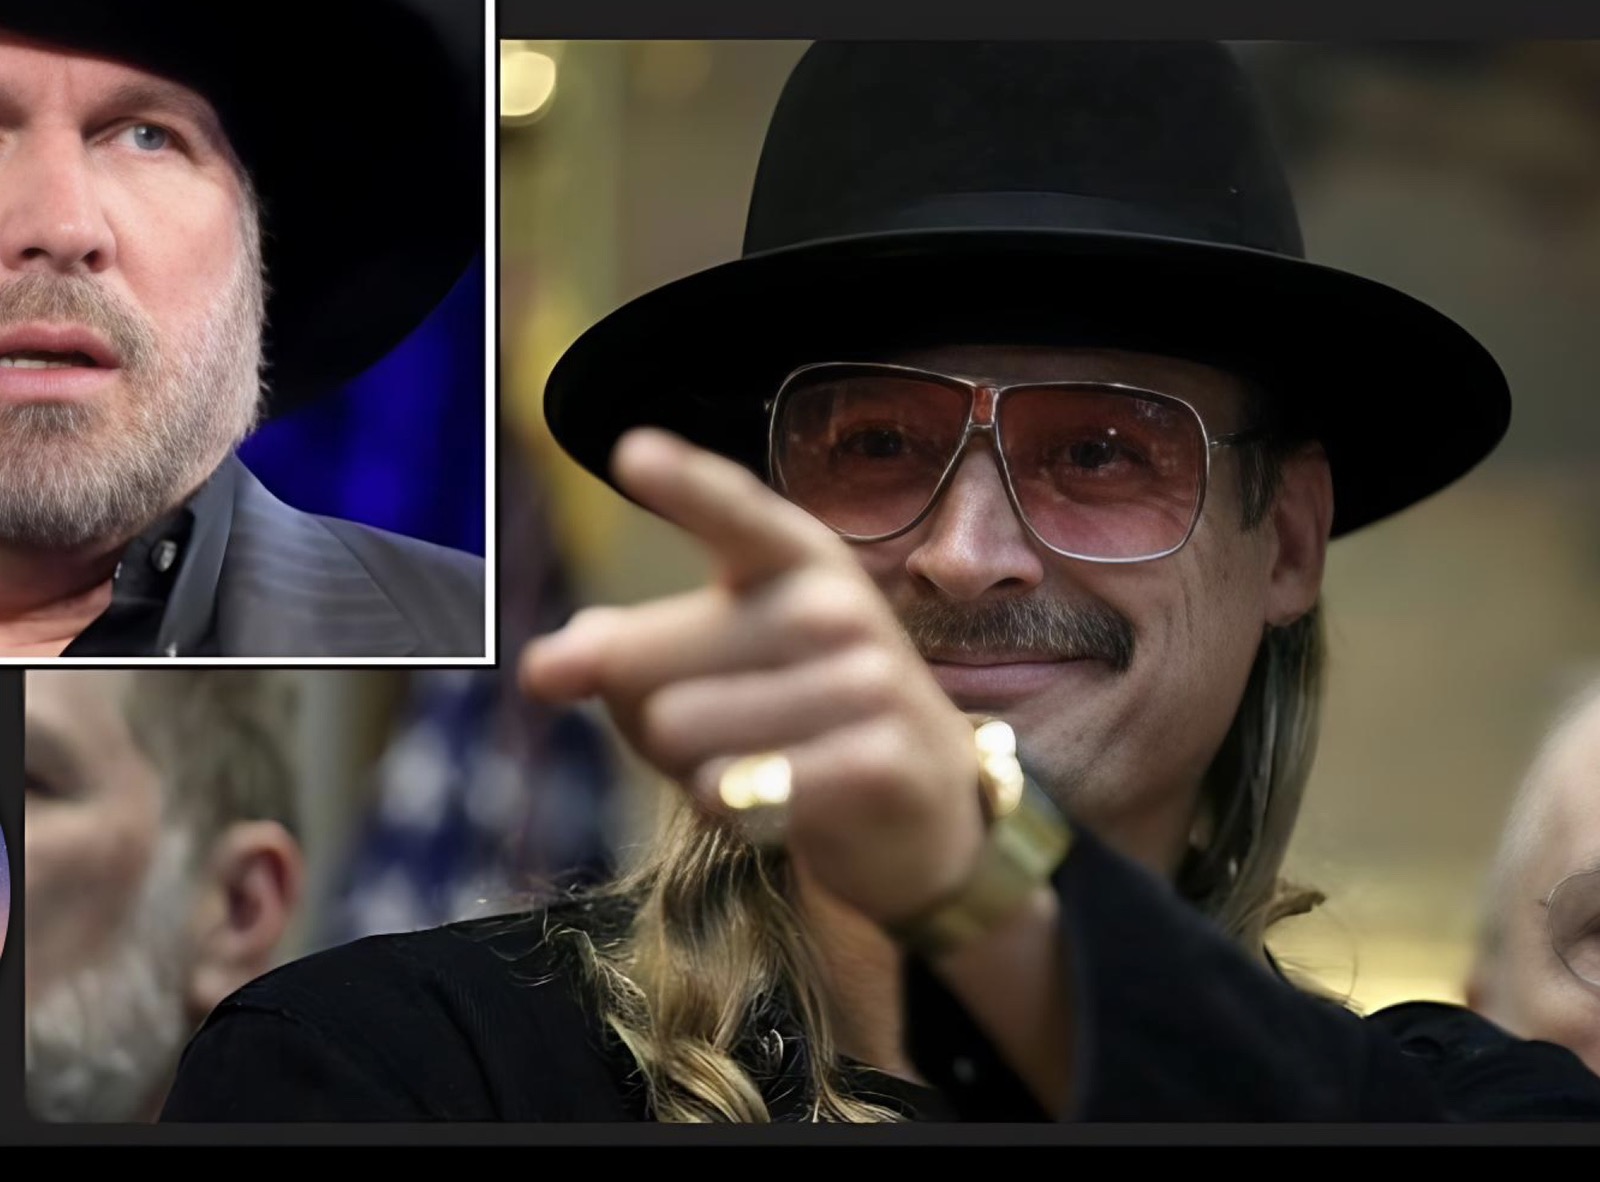 “Kid Rock Politely Requests Garth Brooks to Vacate His Nashville Honky Tonk: “This Bar is Reserved for Certain Folks”